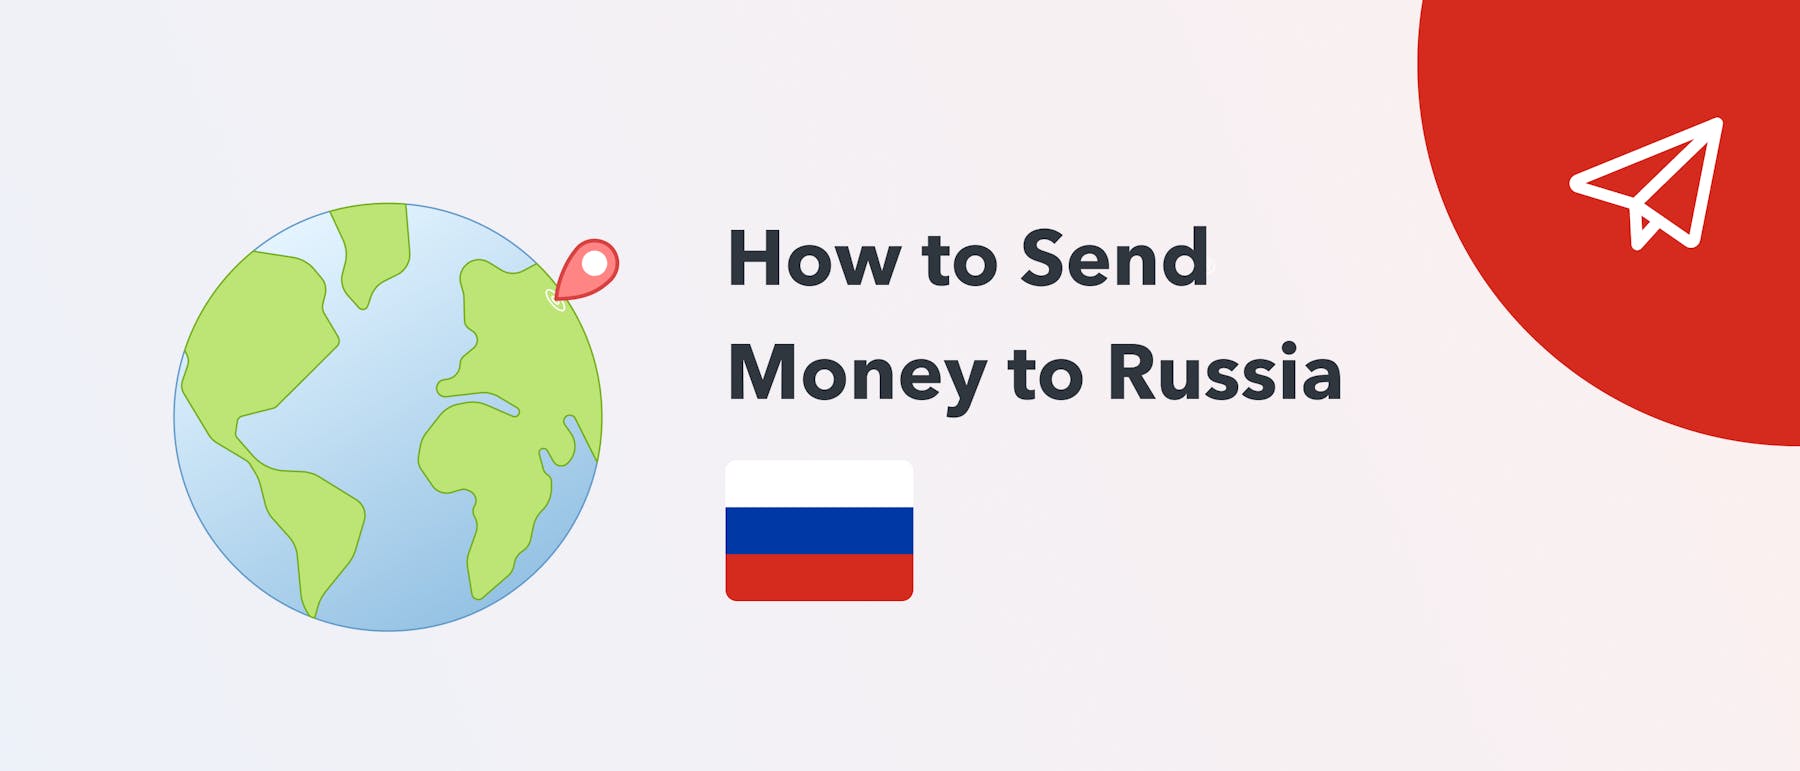 how to send money to Russia now